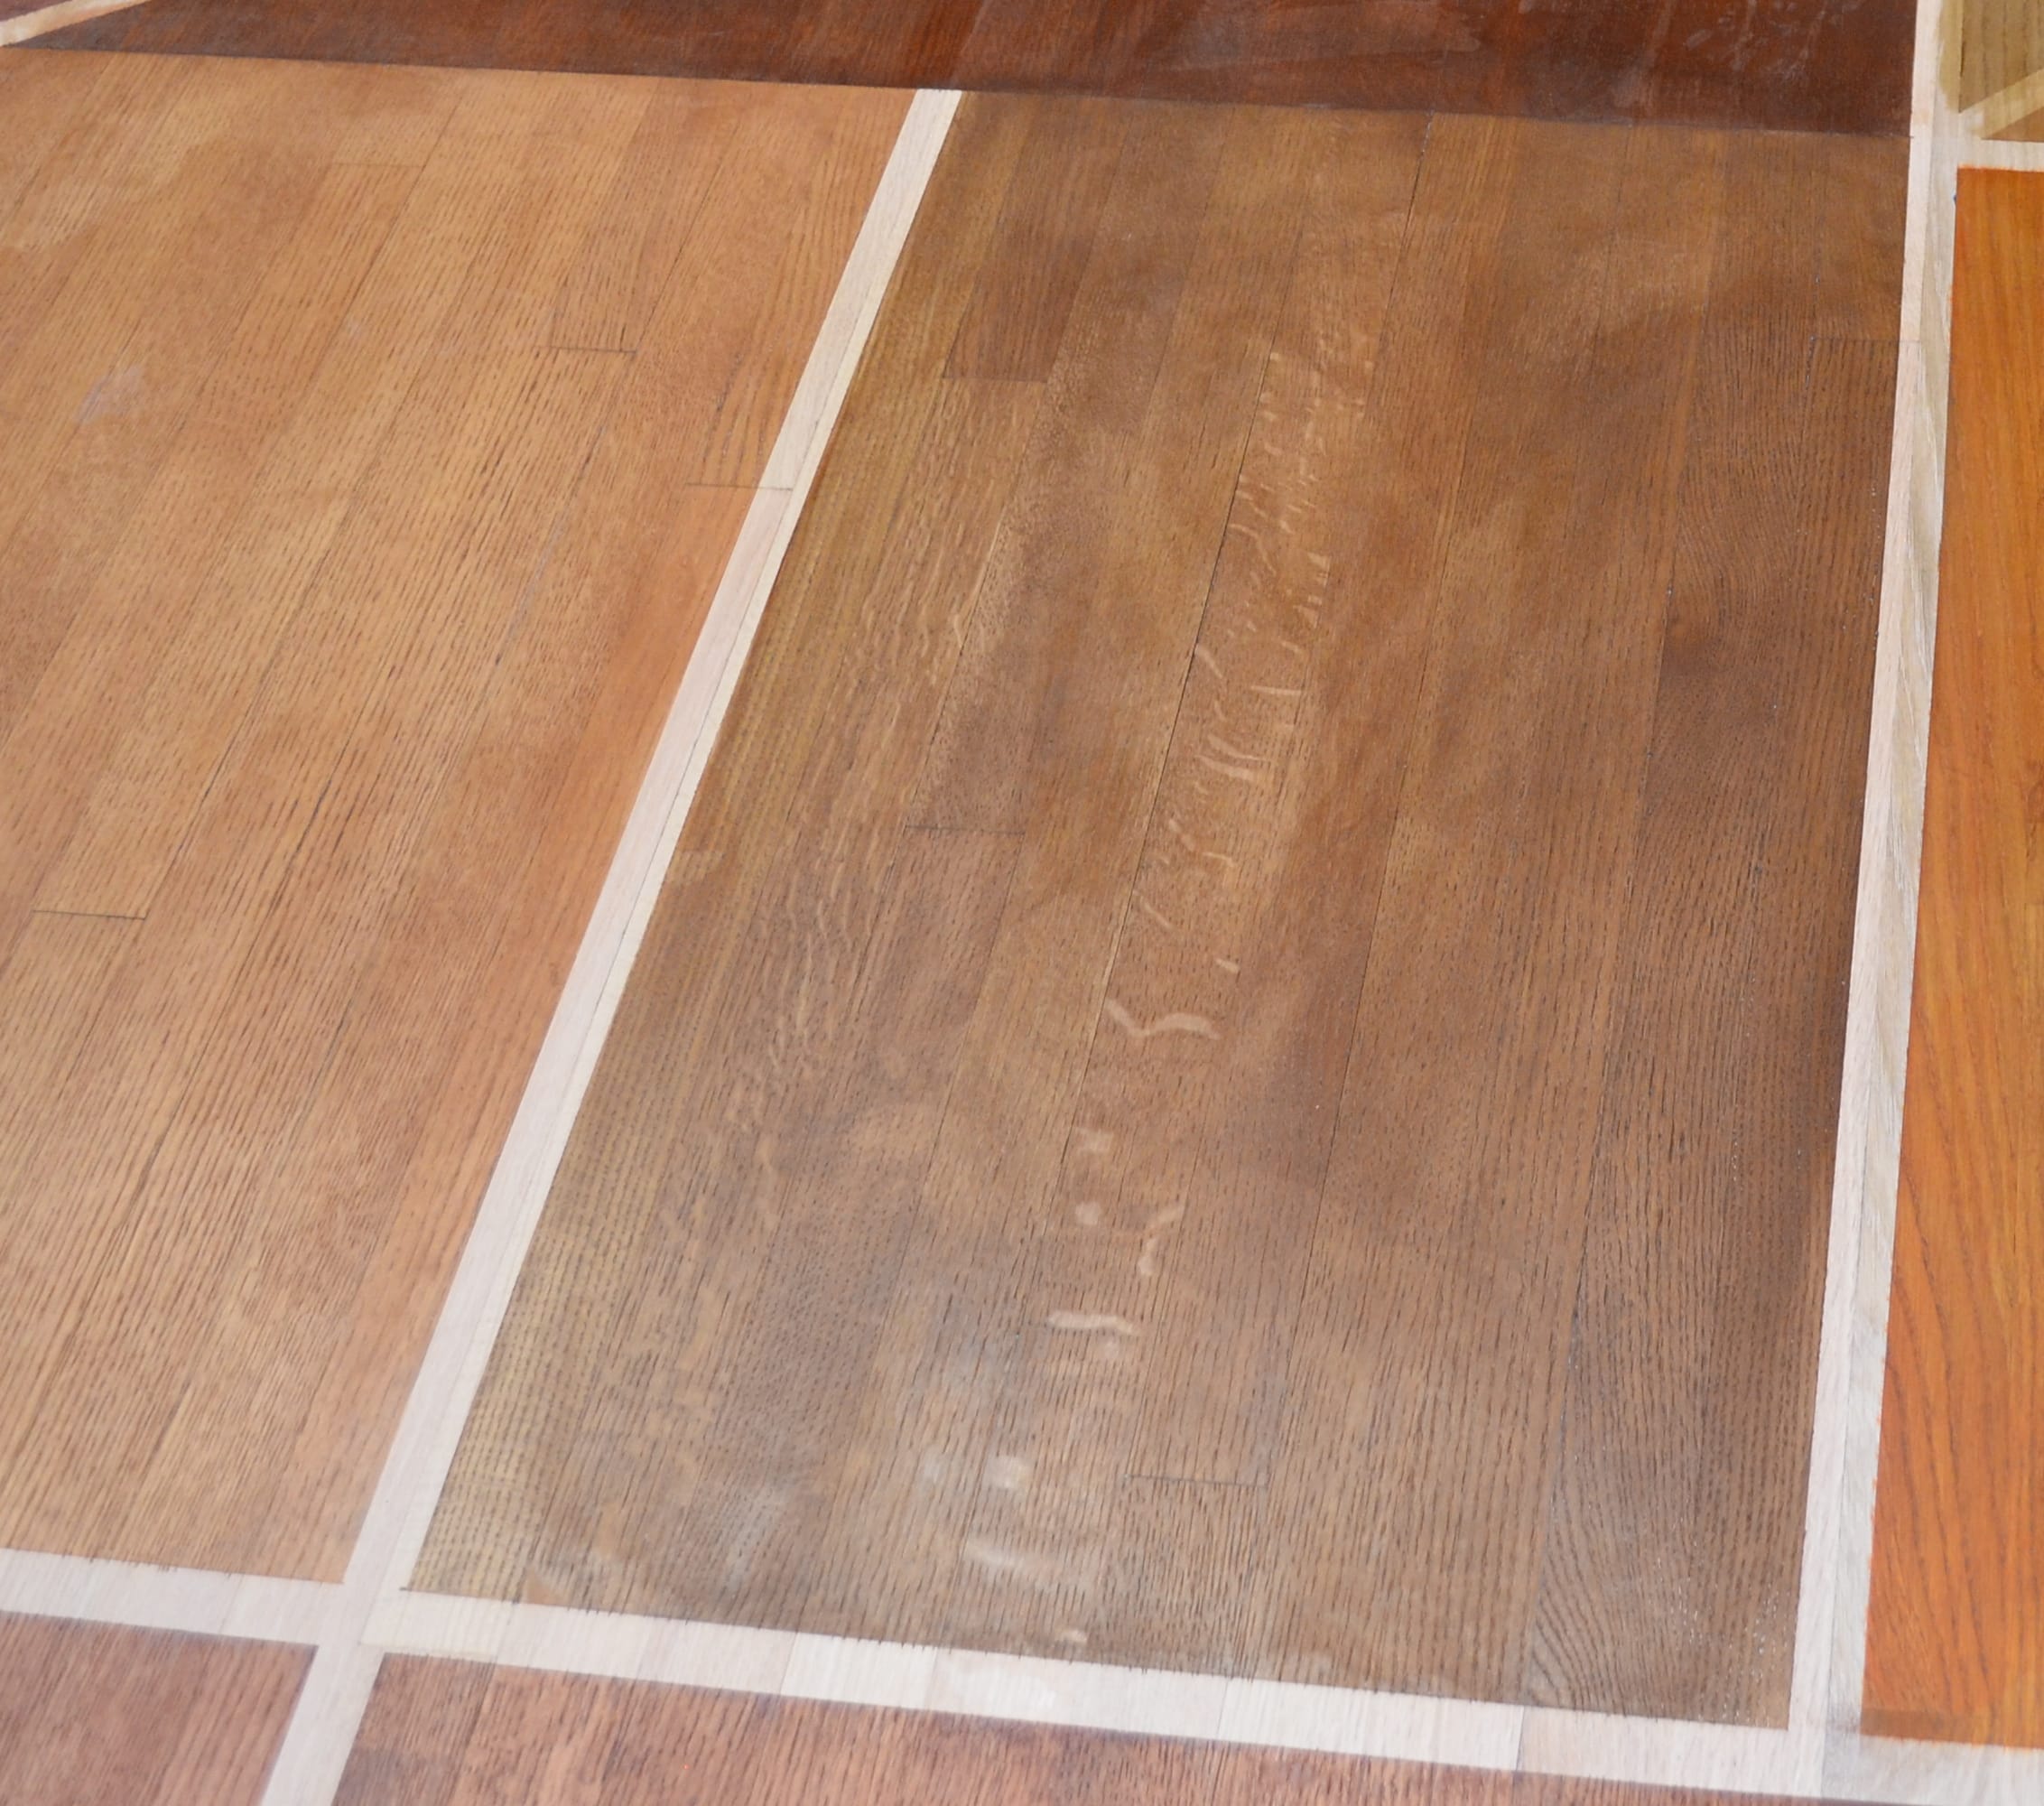 The Wonders and Woes of Waterbased Stain Natural Interiors®